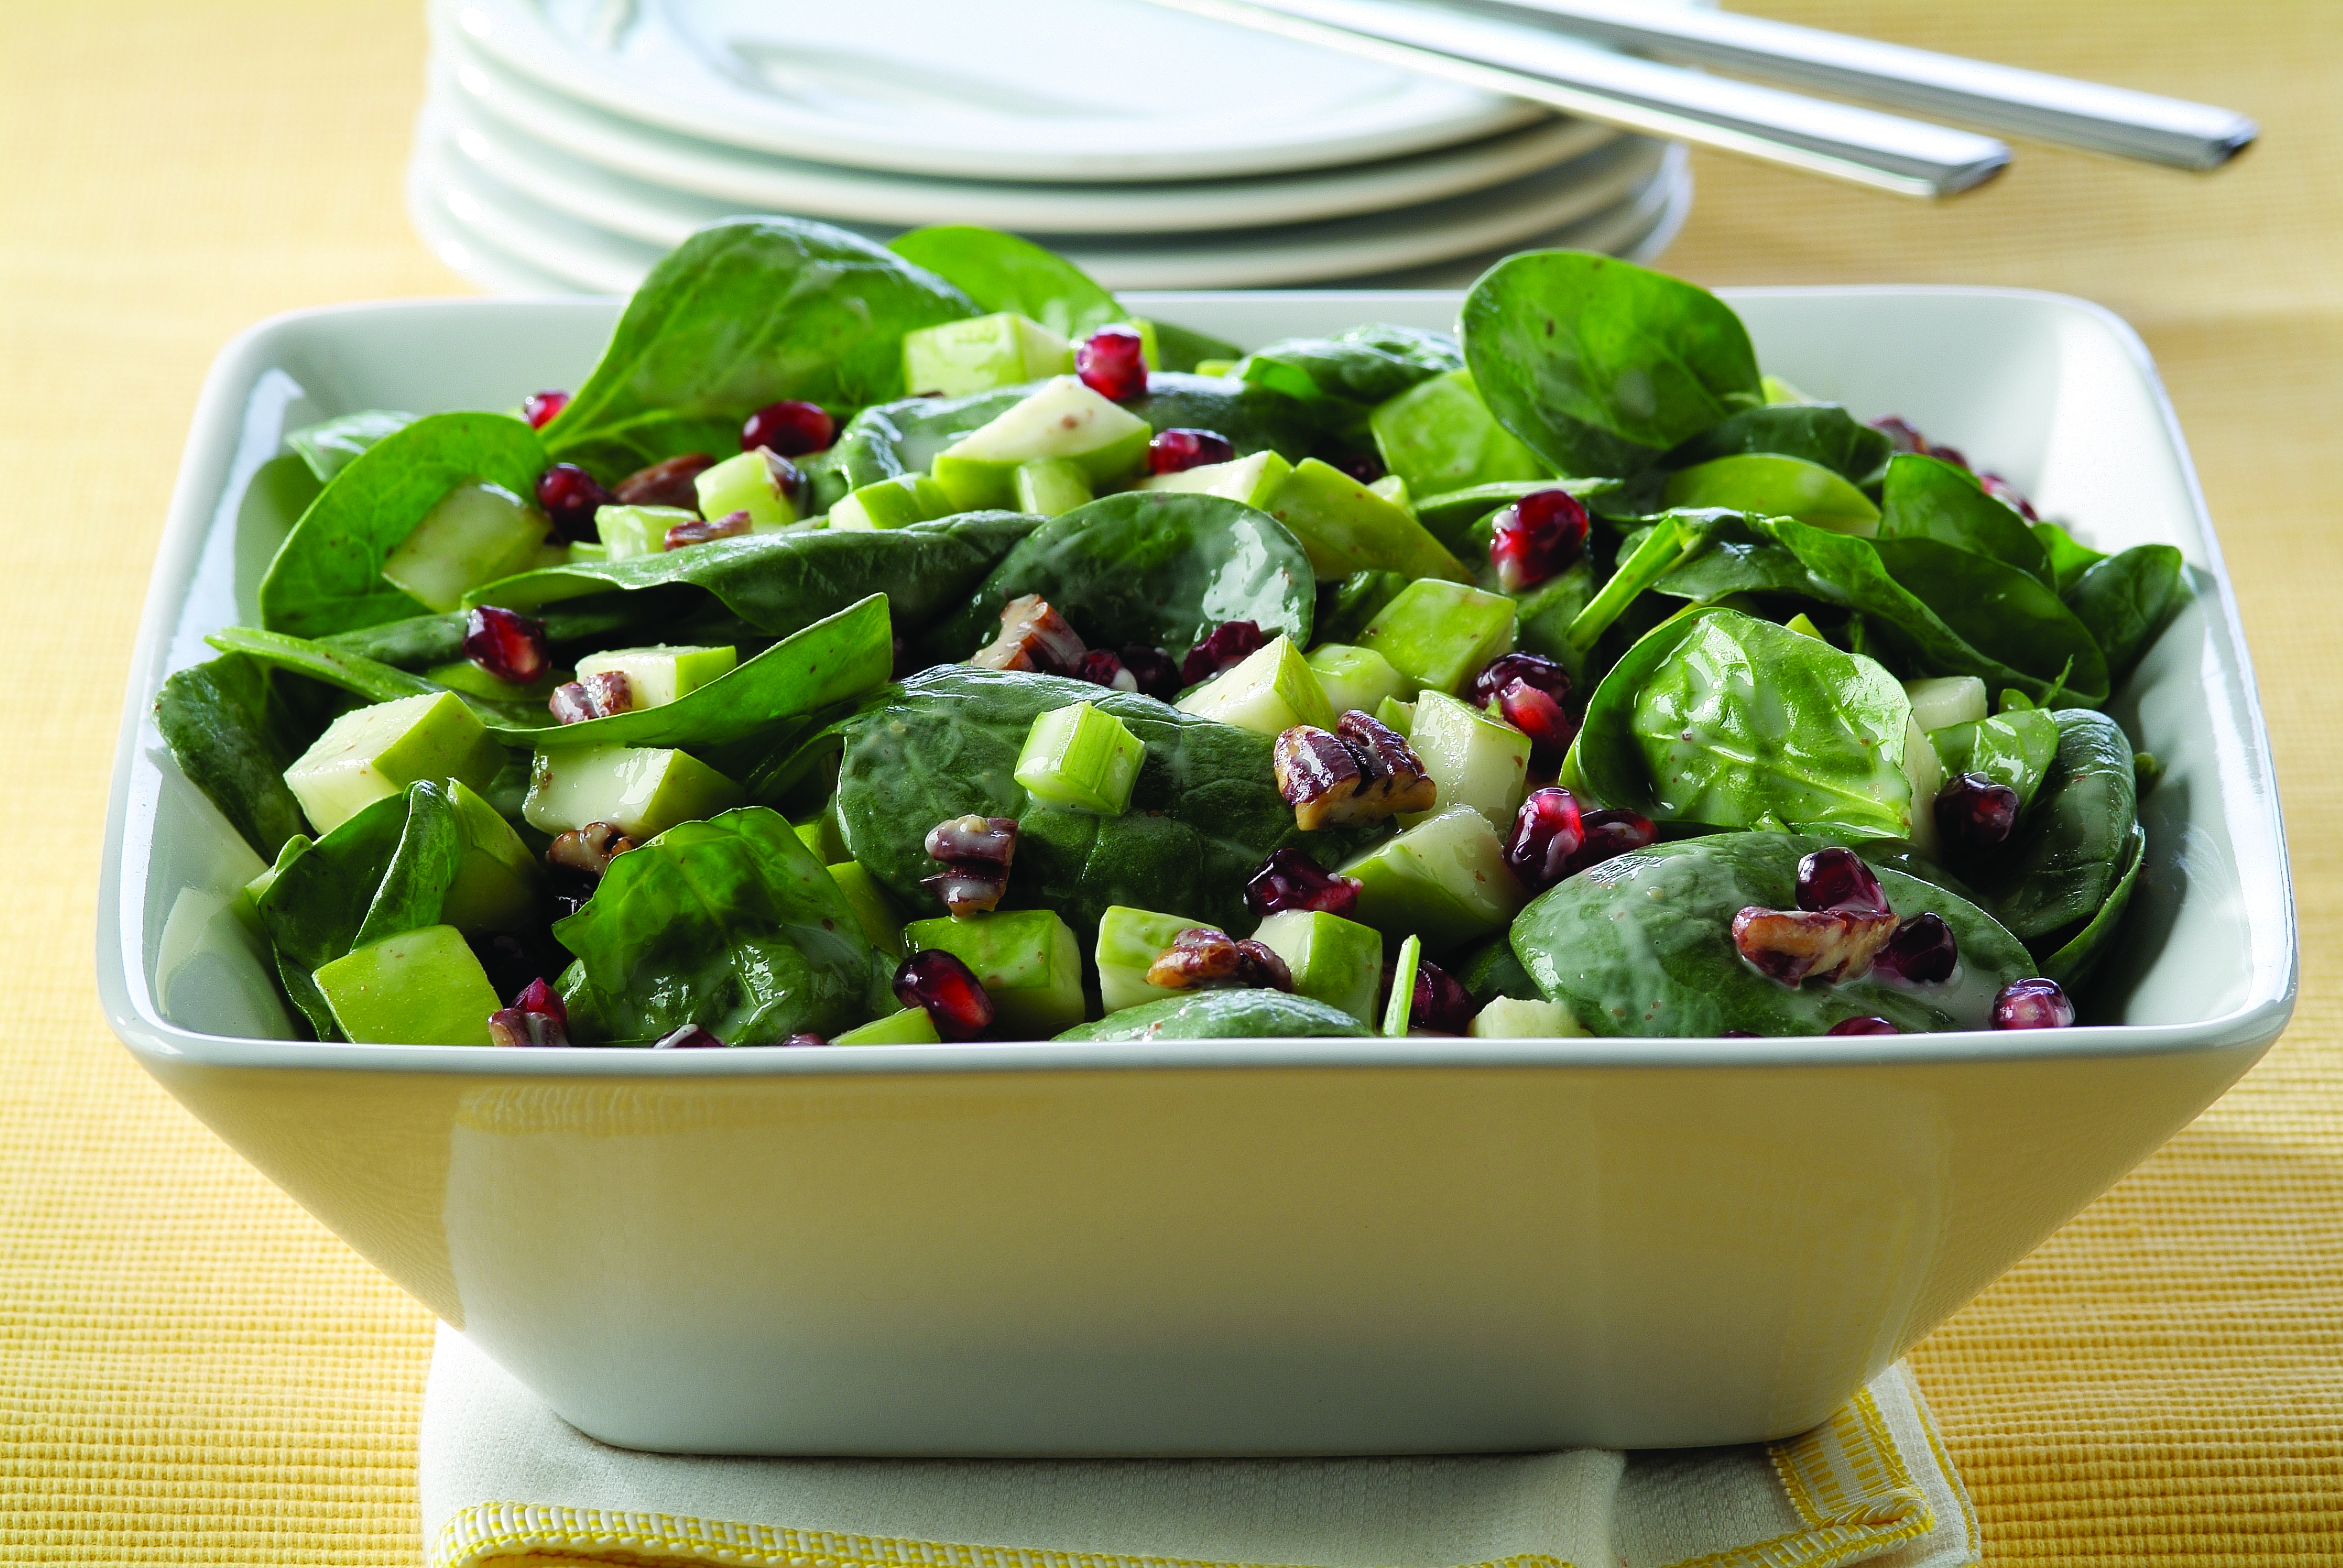 Pomegranate-Spinach Salad with Apples